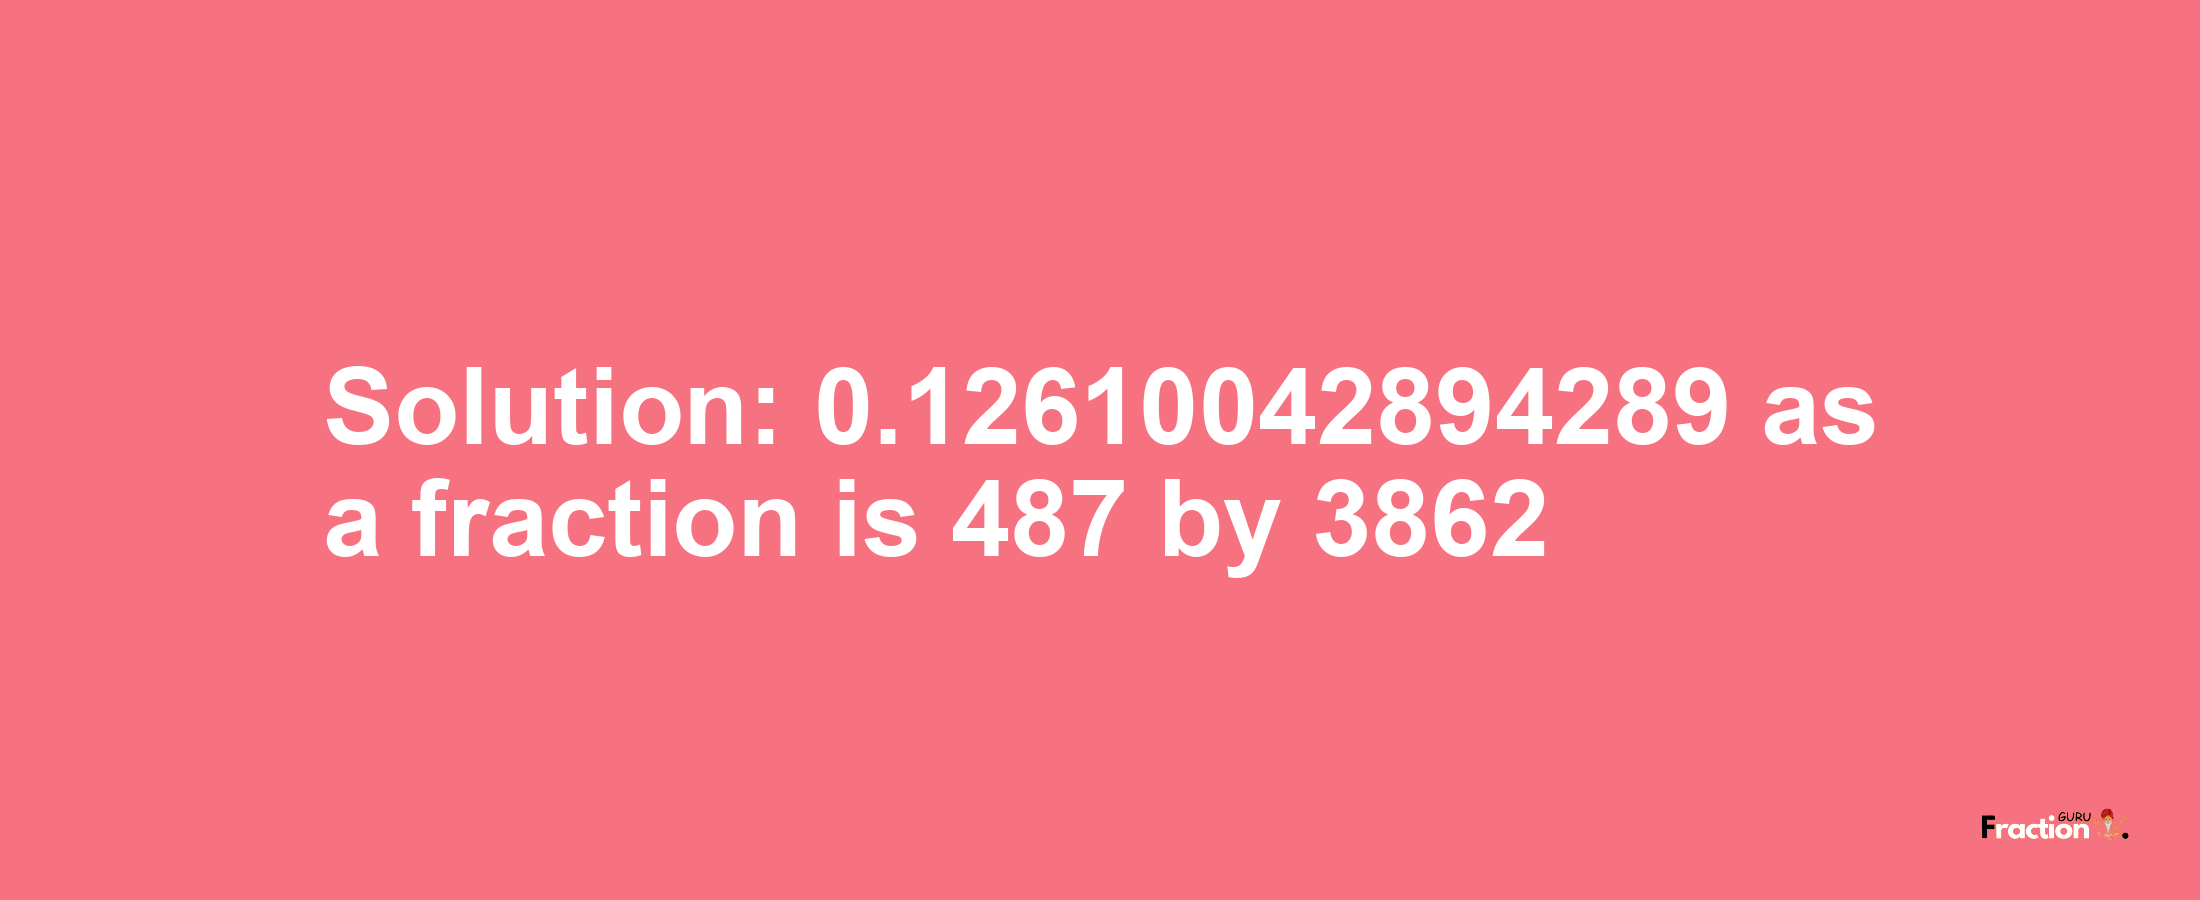 Solution:0.12610042894289 as a fraction is 487/3862